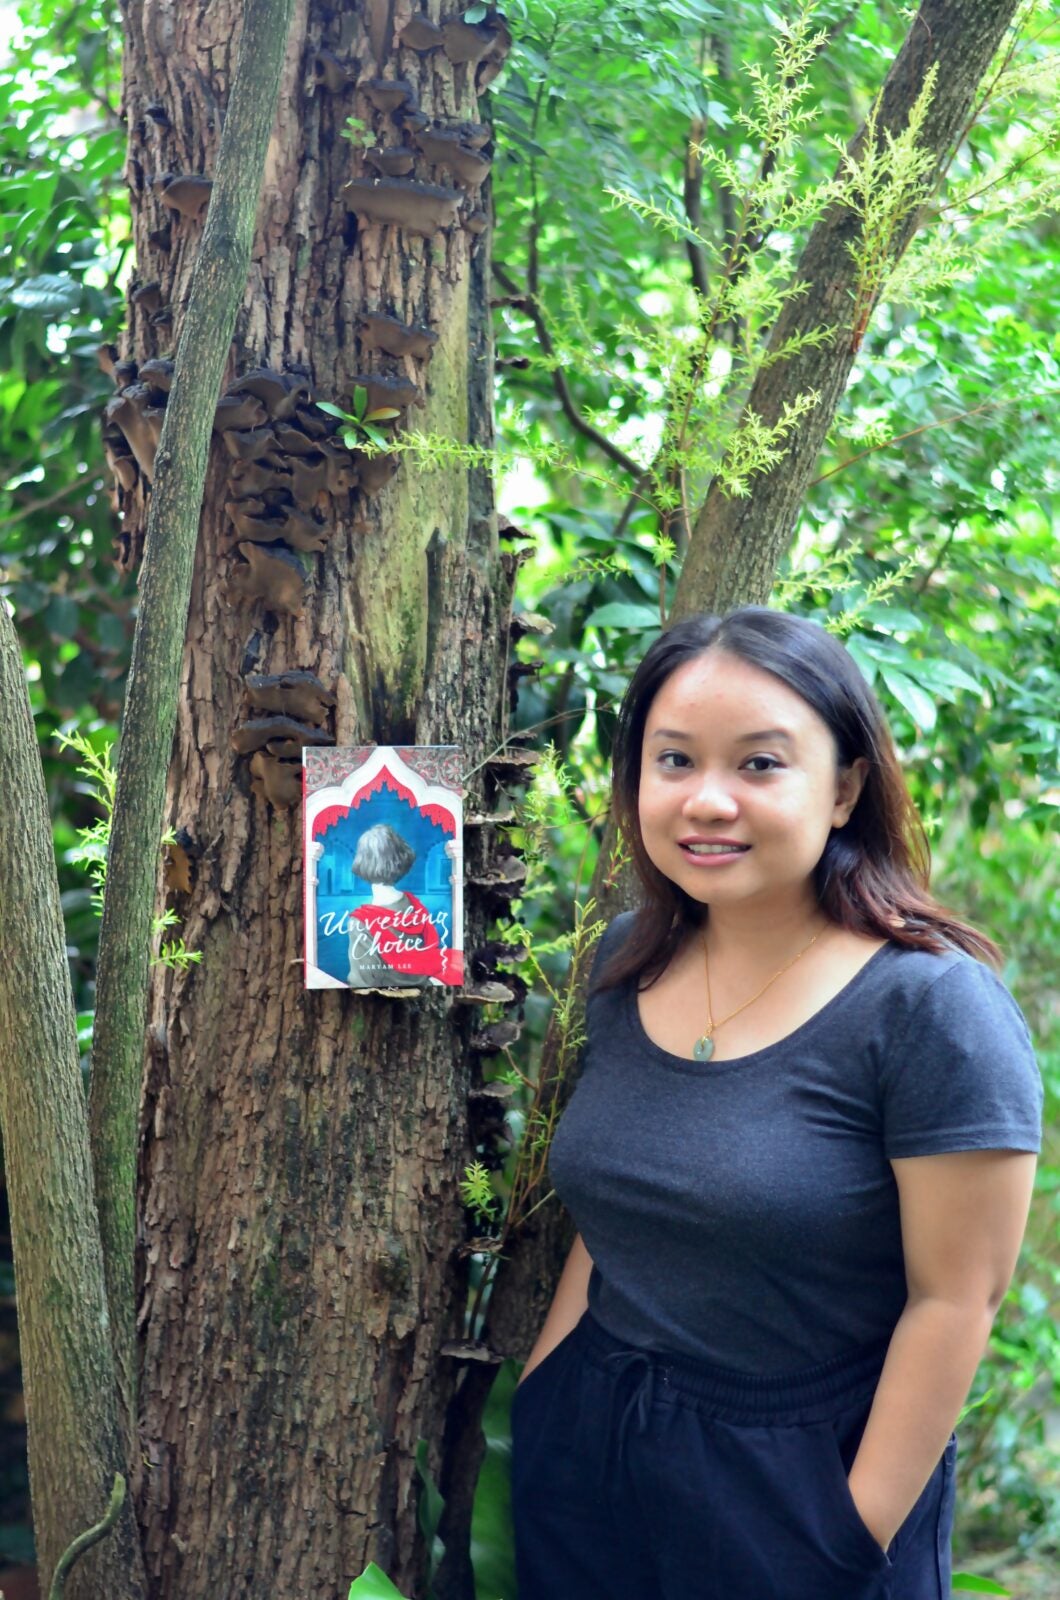 Maryam Lee, activist and feminist, posing with her published book, "Unveiling Choice" (2019)